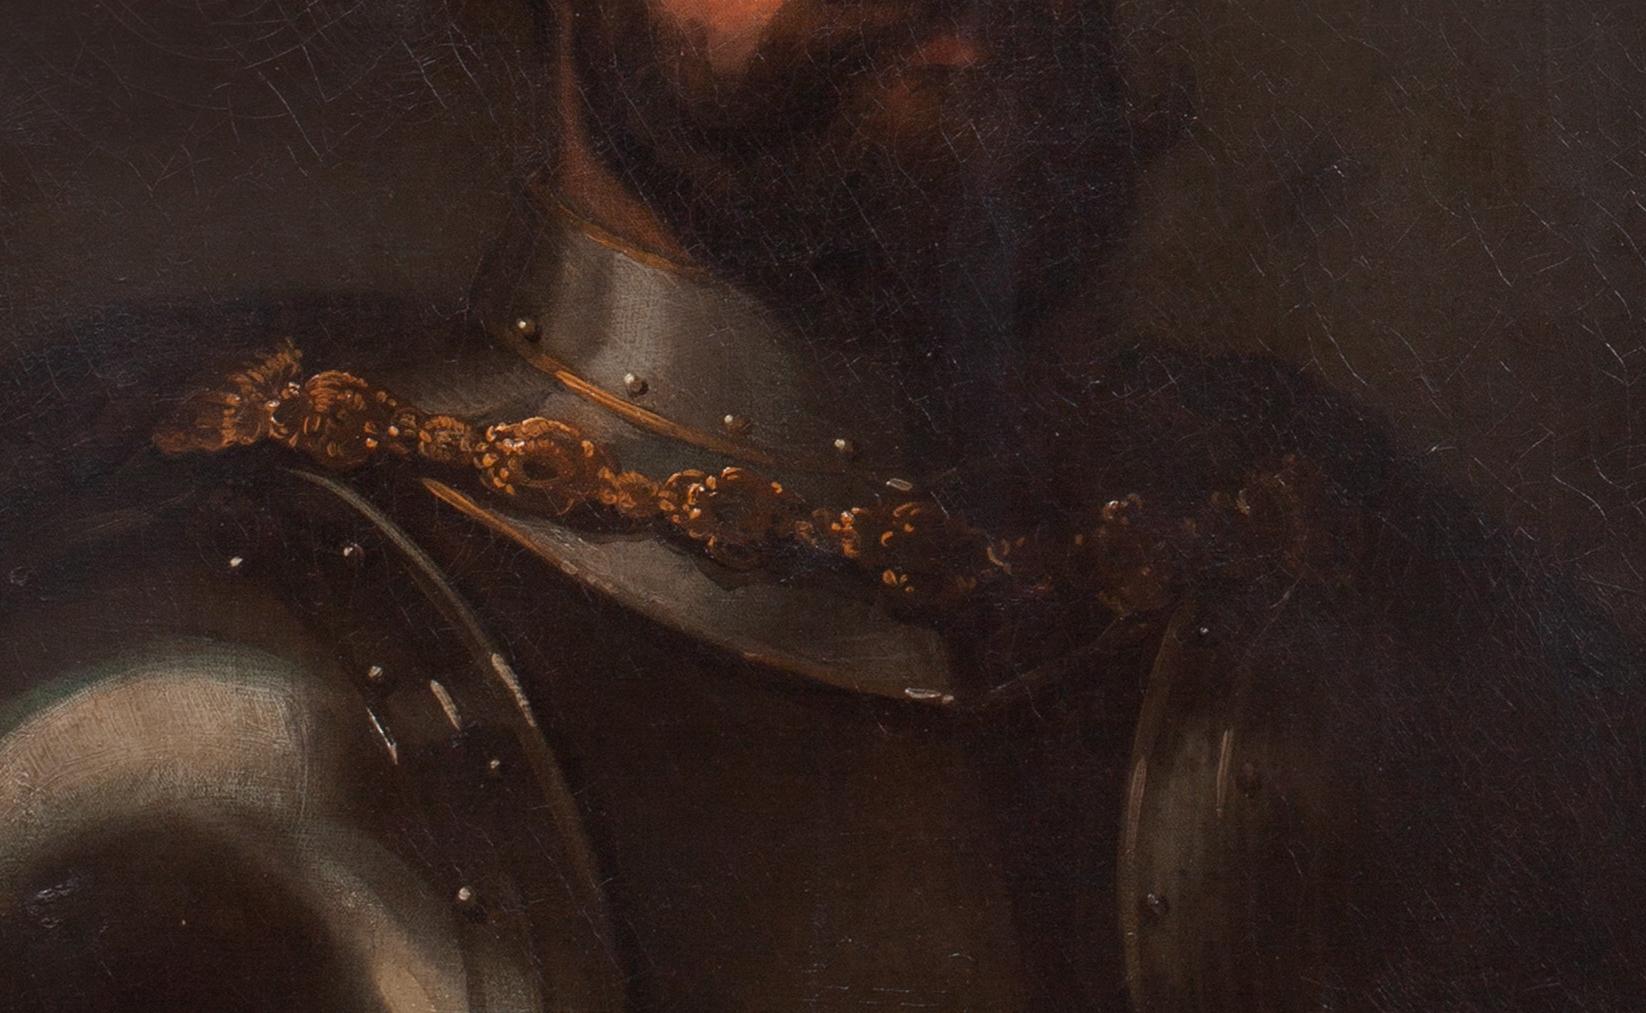 Portrait Of A Venetian Commander In Armour, 16th Century

Italian School - Circle of TITIAN

Large 16th Century Italian School portrait of a Venetian Commander in armour, oil on canvas. Superb quality and condition rare early Venetian portrait of a